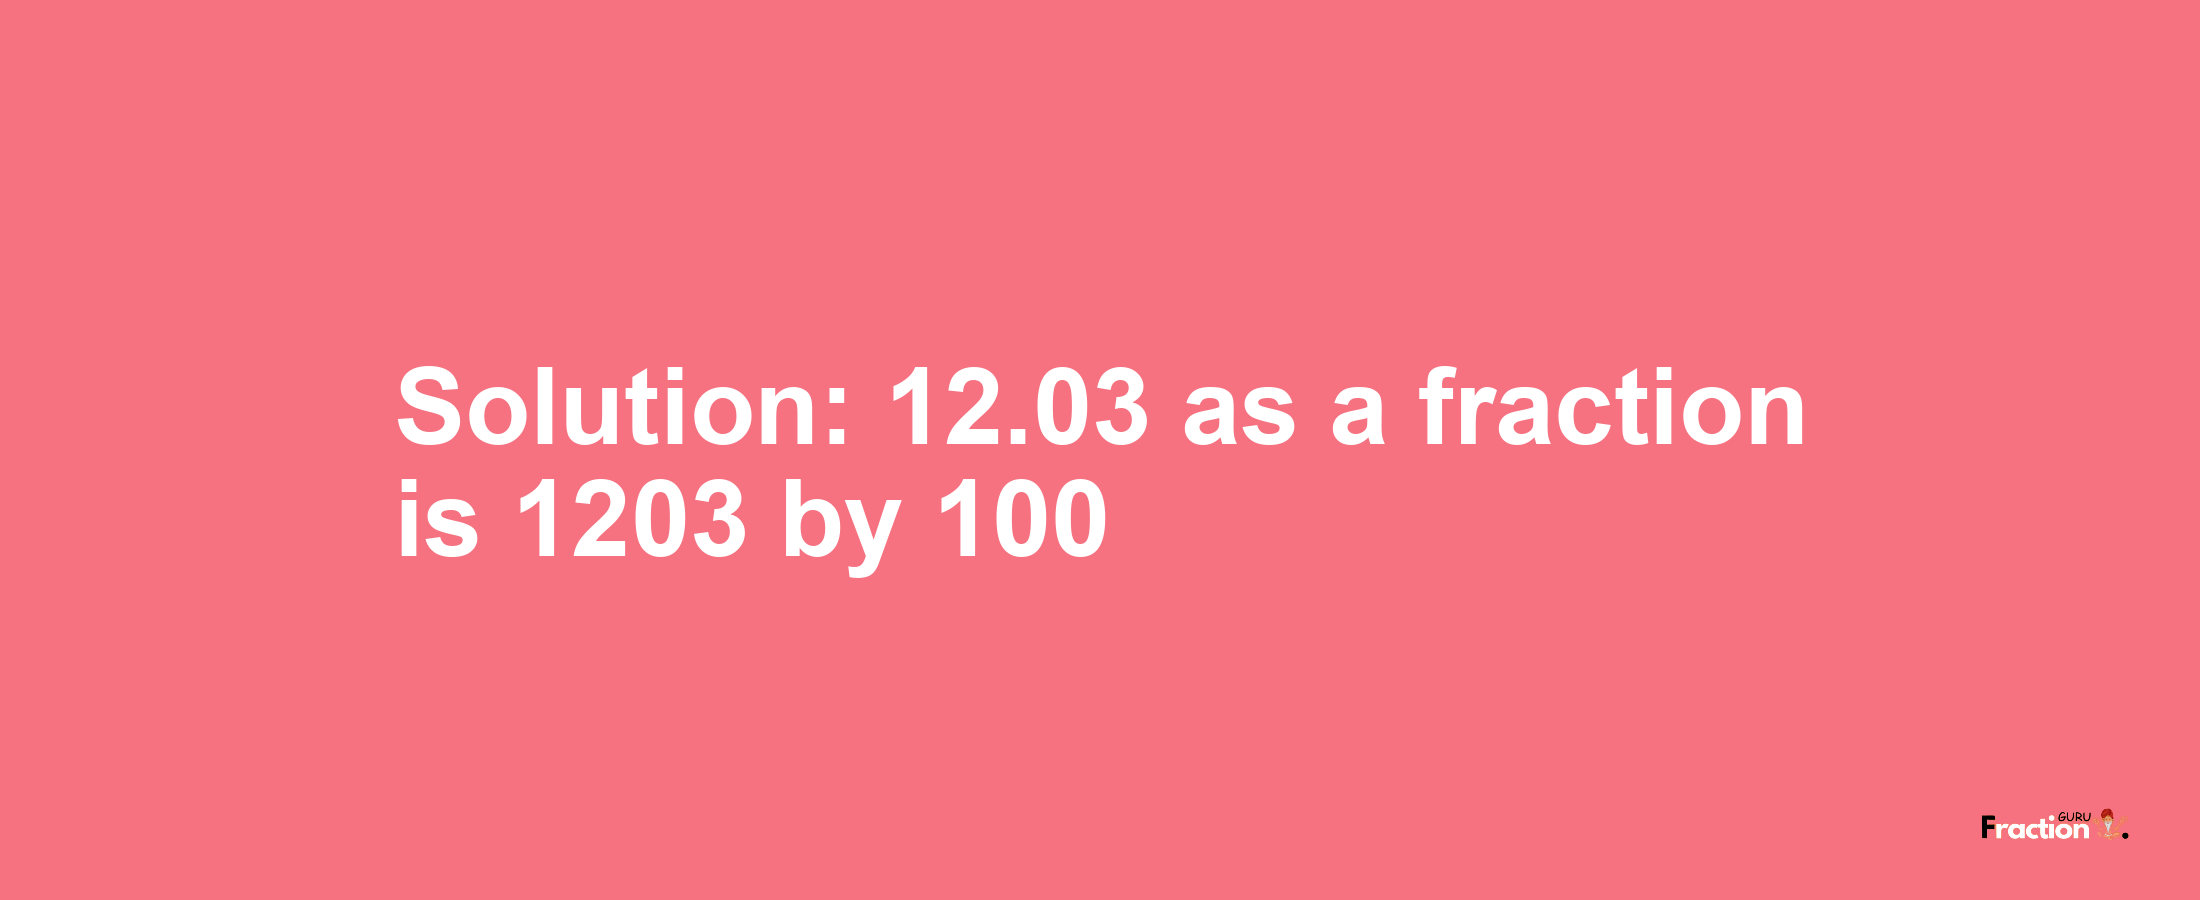 Solution:12.03 as a fraction is 1203/100